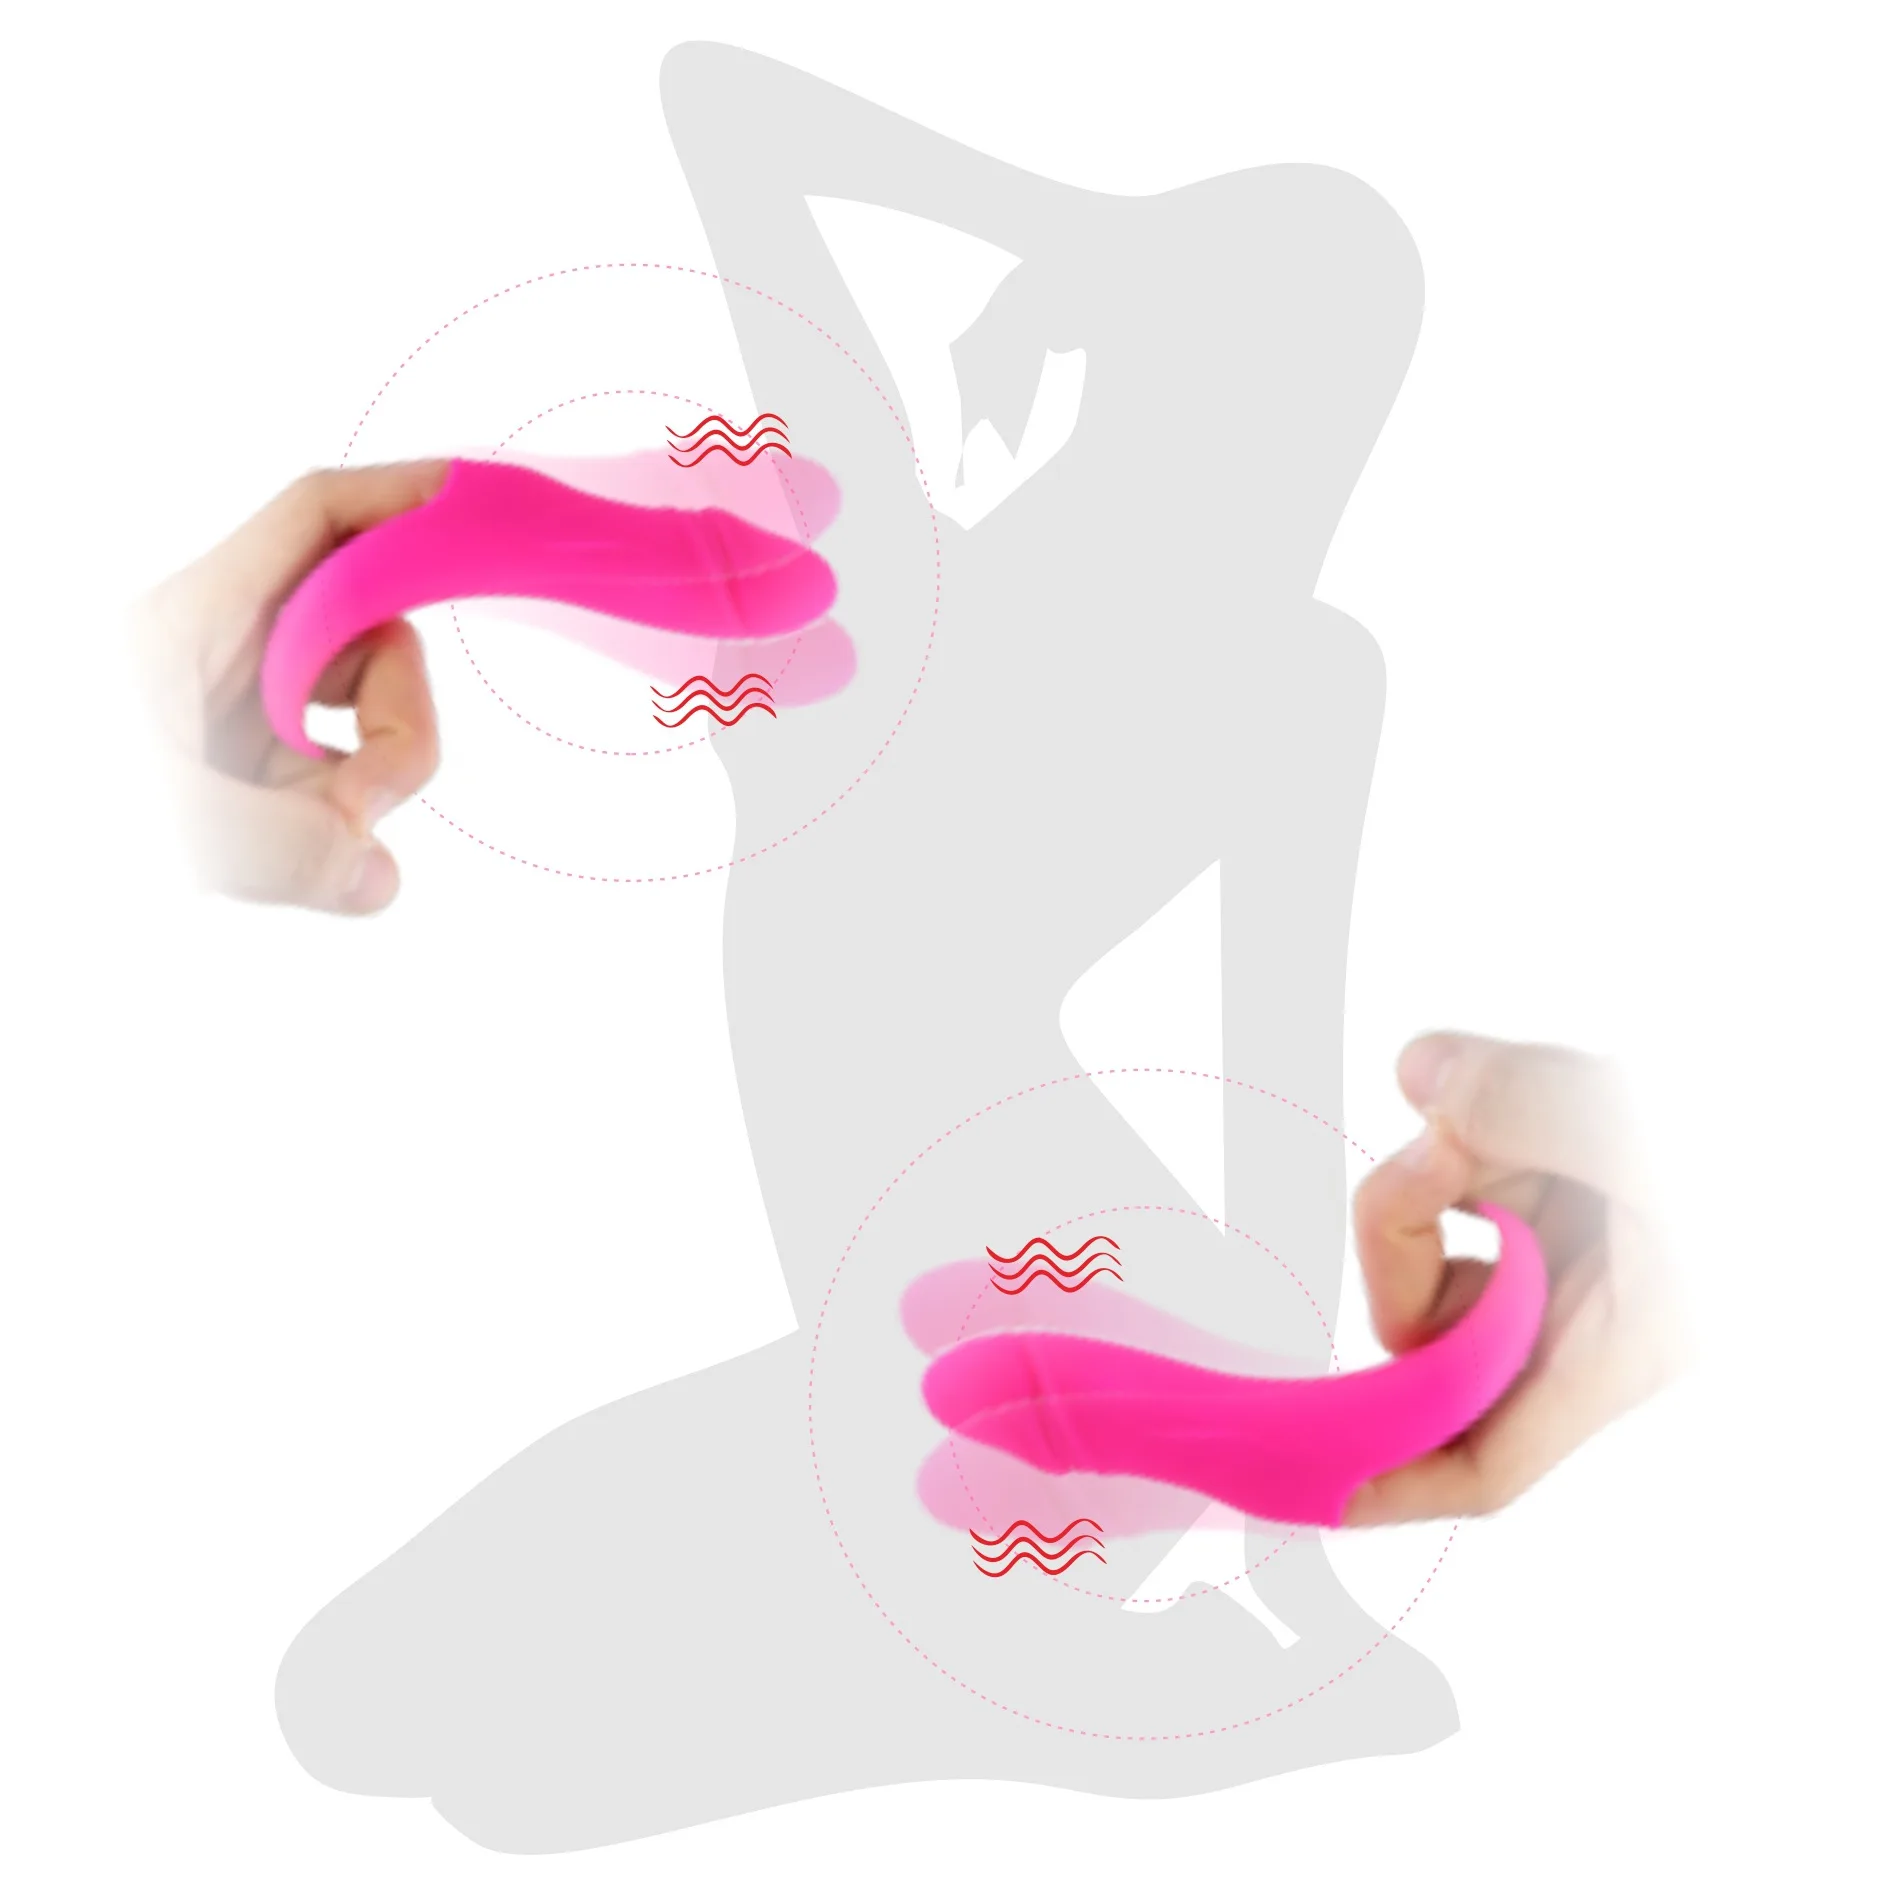 

Wireless Tongue Licking App Finger Wearing Multi Frequency Vibration Egg Jumping Female Masturbation Male and Female Sharing